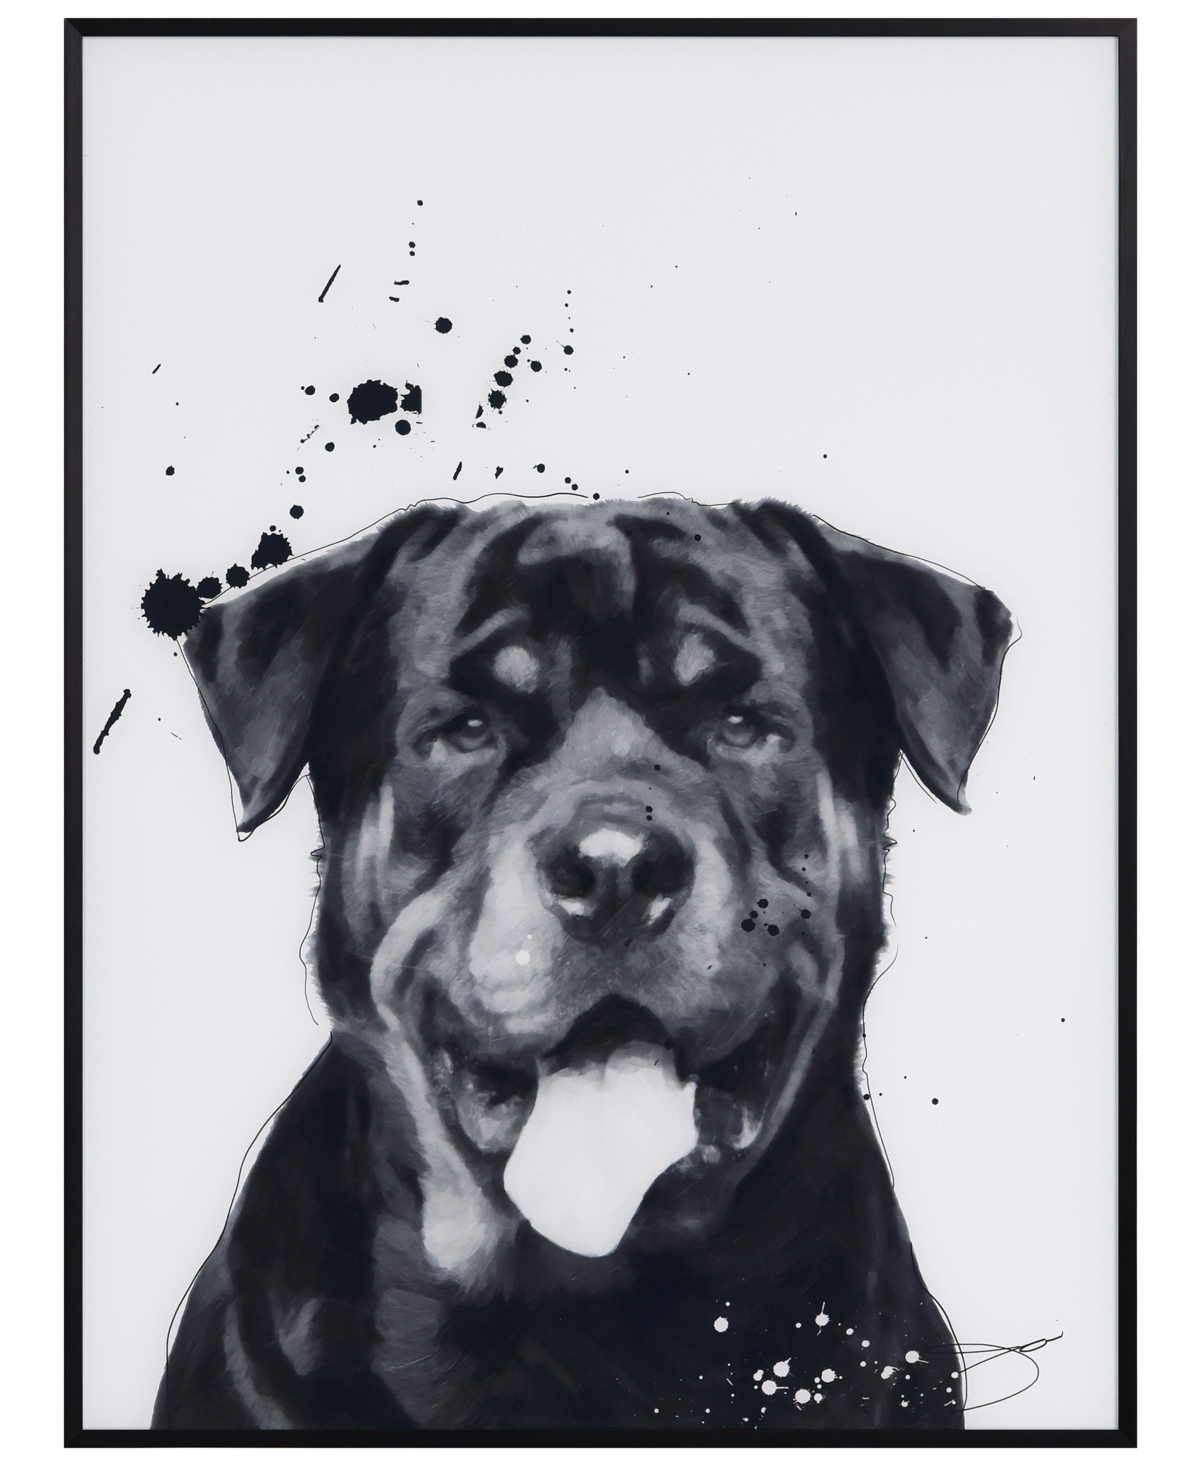 Empire Art Direct "rottweiler" Pet Paintings On Printed Glass Encased With A Black Anodized Frame, 24" X 18" X 1" In Black And White